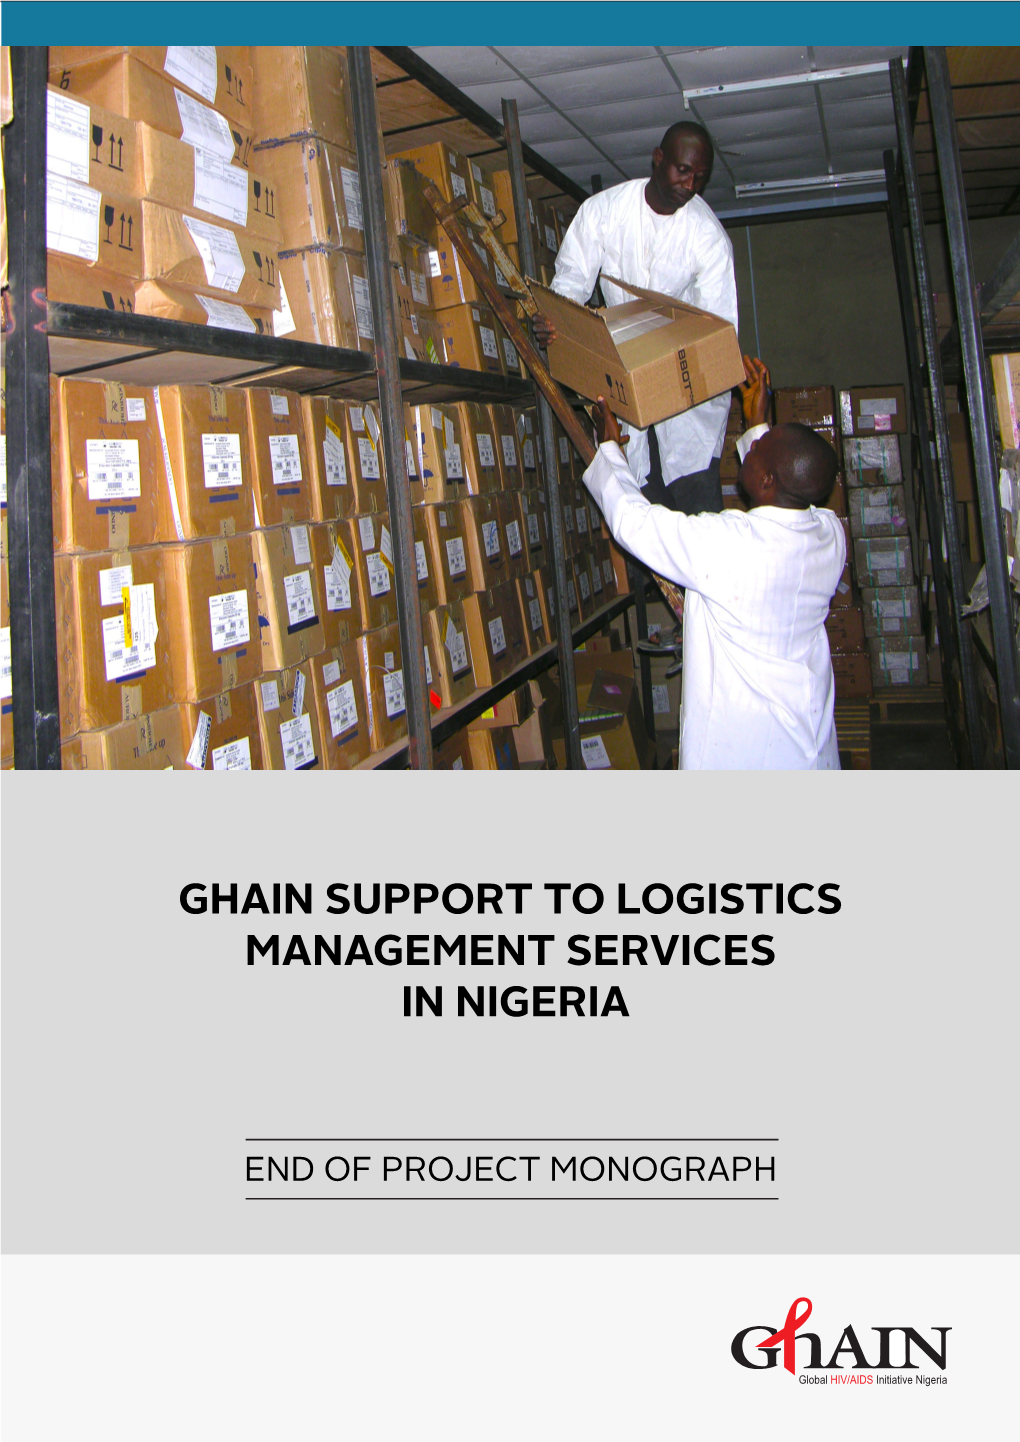 Ghain Support to Logistics Management Services in Nigeria